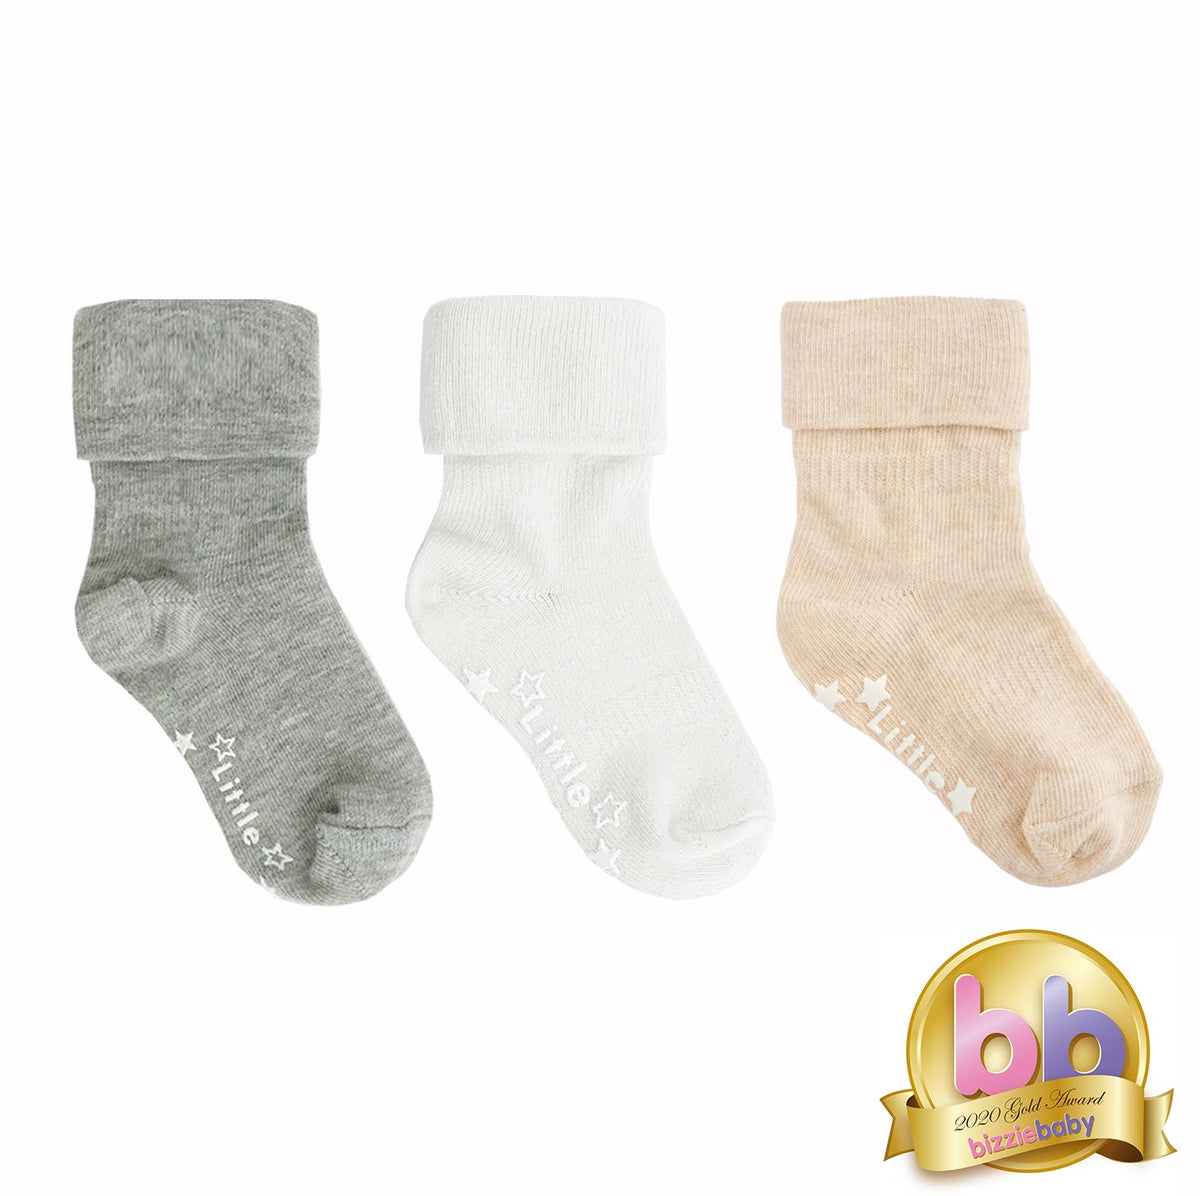 Talipes (clubfoot) Boots and Bar Socks - Non-Slip Stay On Baby and Toddler Socks - 3 Pack in White, Oat & Grey Marl